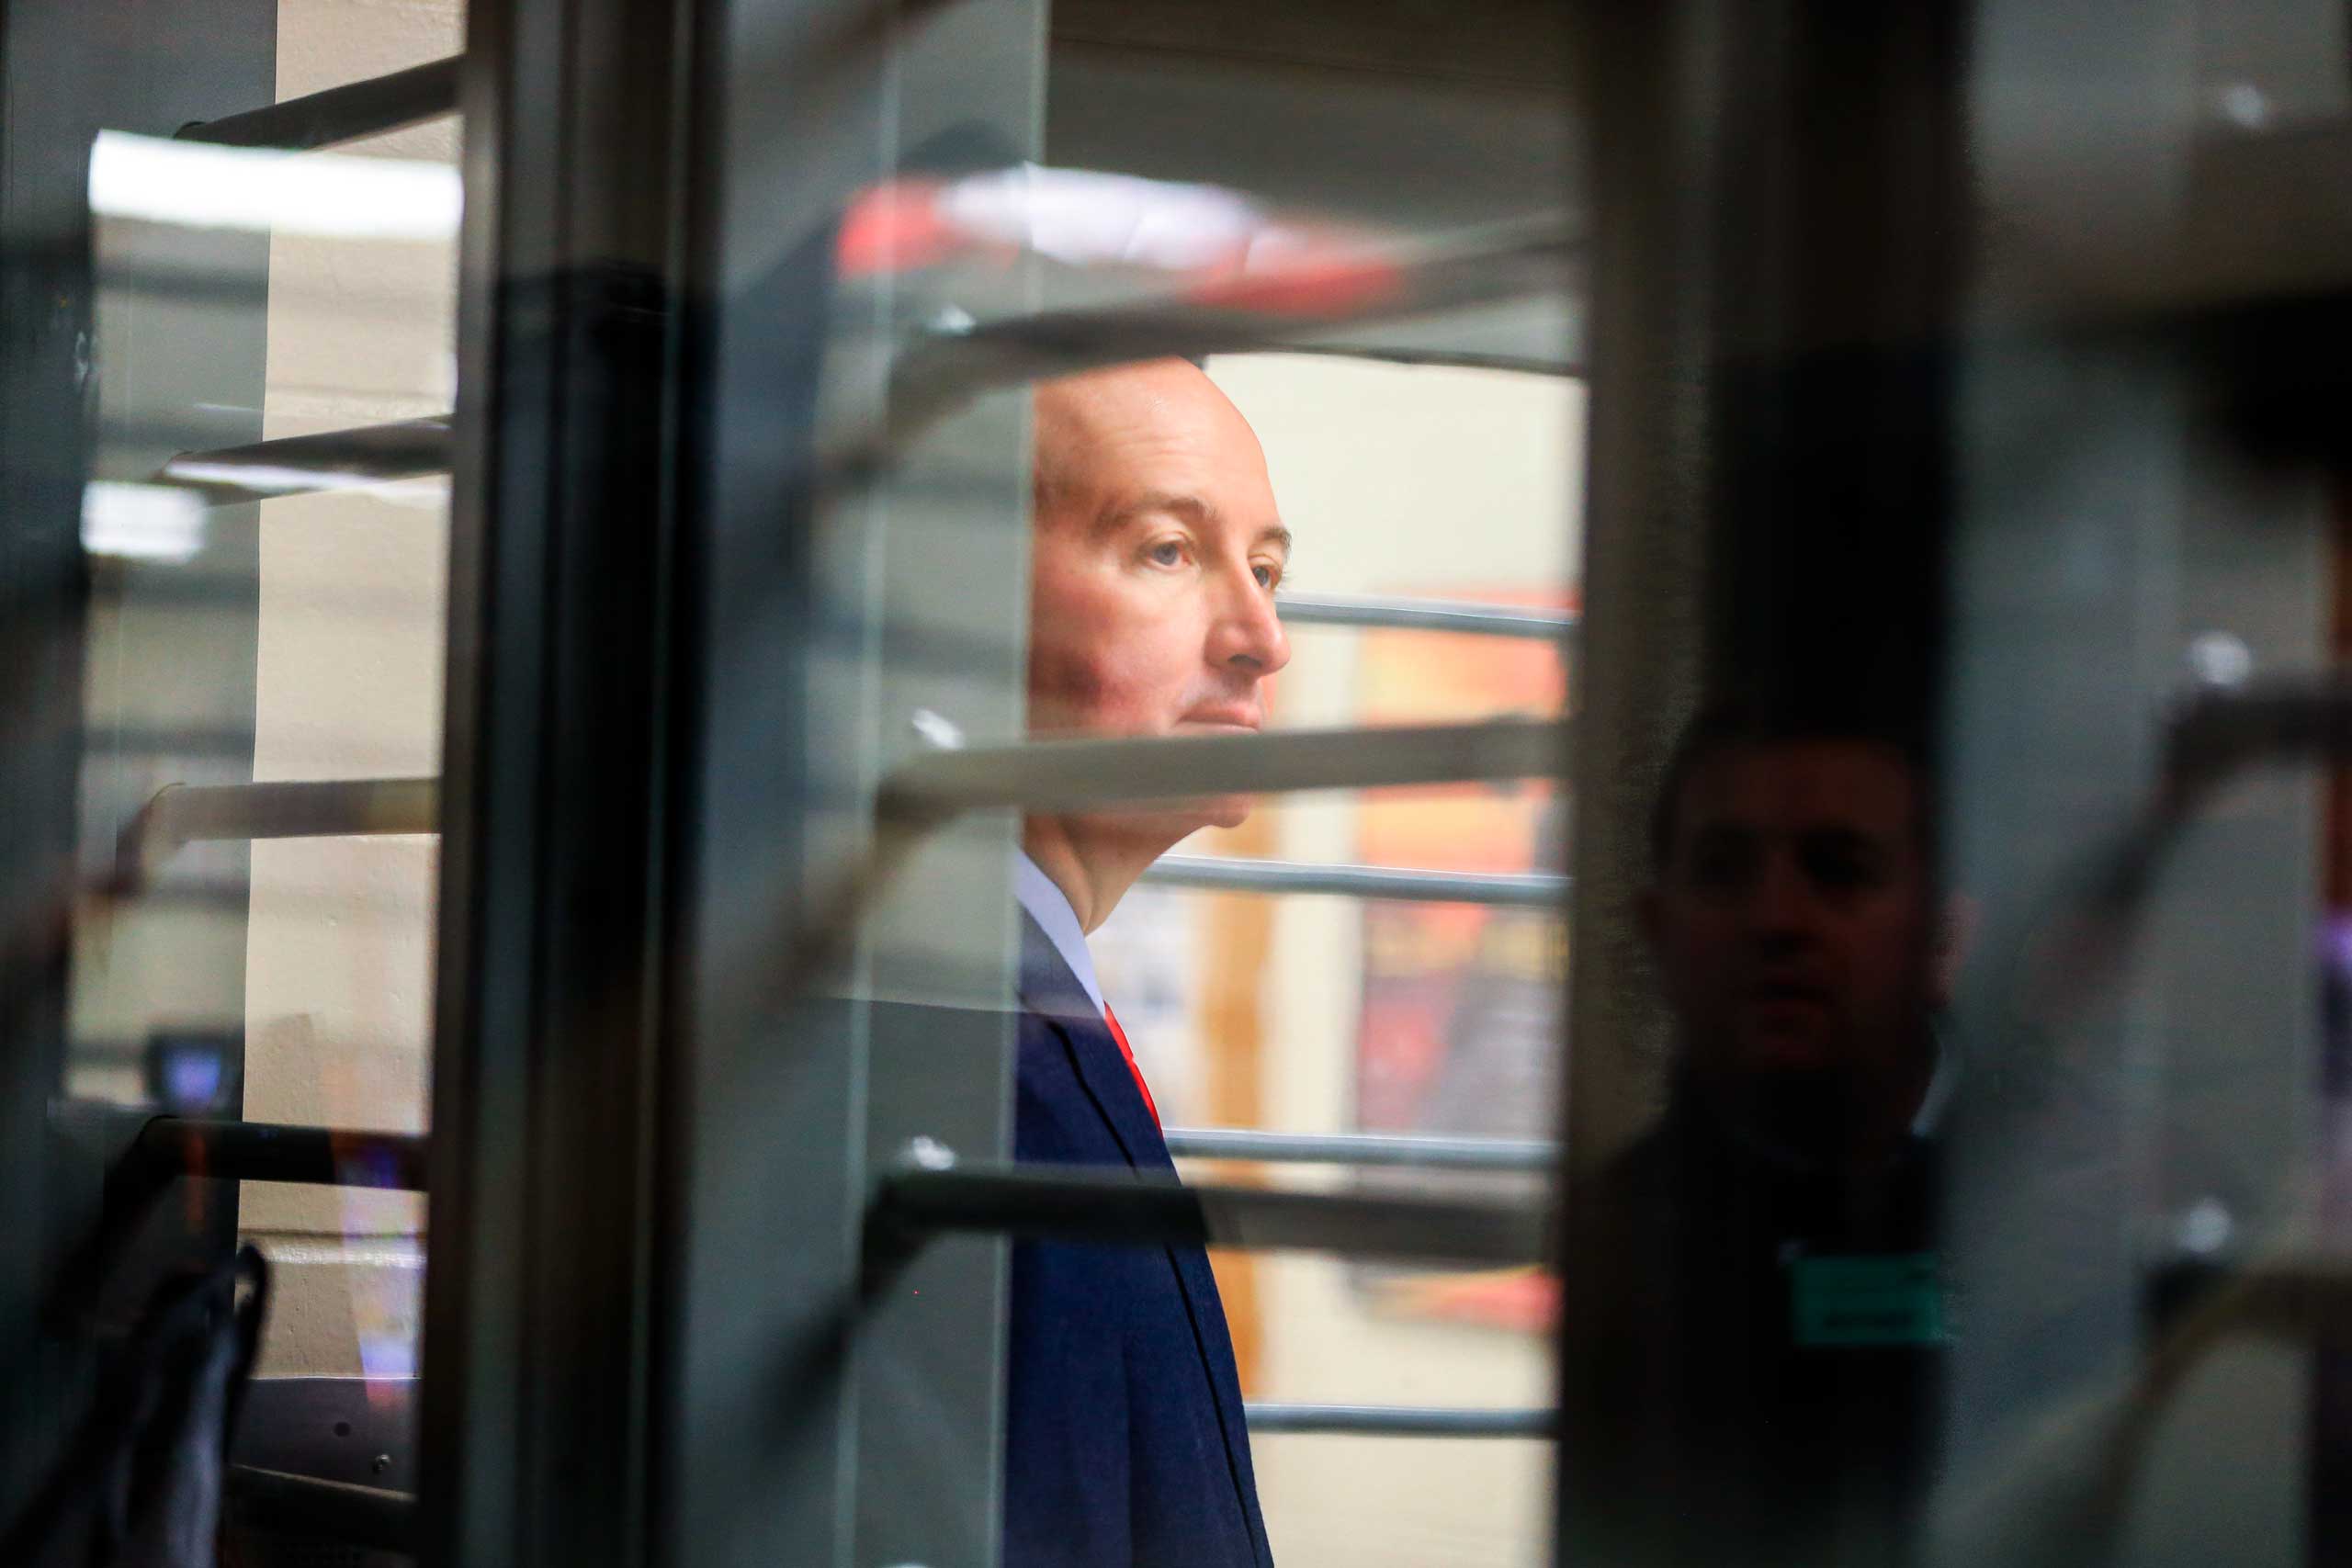 Nebraska Gov. Pete Ricketts is seen through bars during a tour of the Tecumseh State Correctional Institution in Tecumseh, Neb., on May 19, 2015. (Nati Harnik—AP)